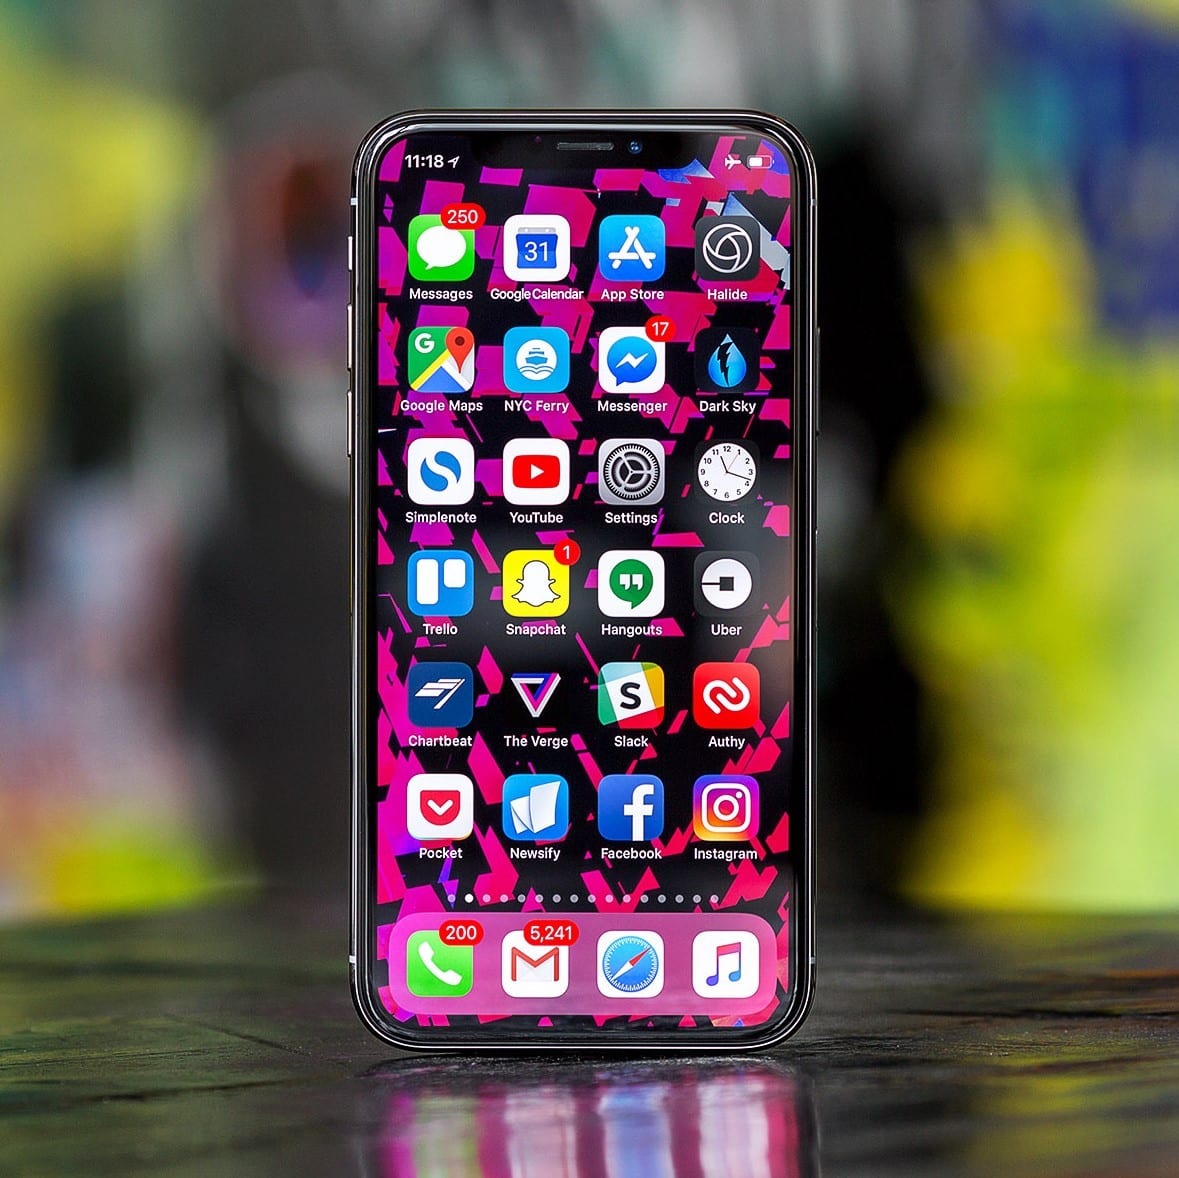 iPhone X review: face the future